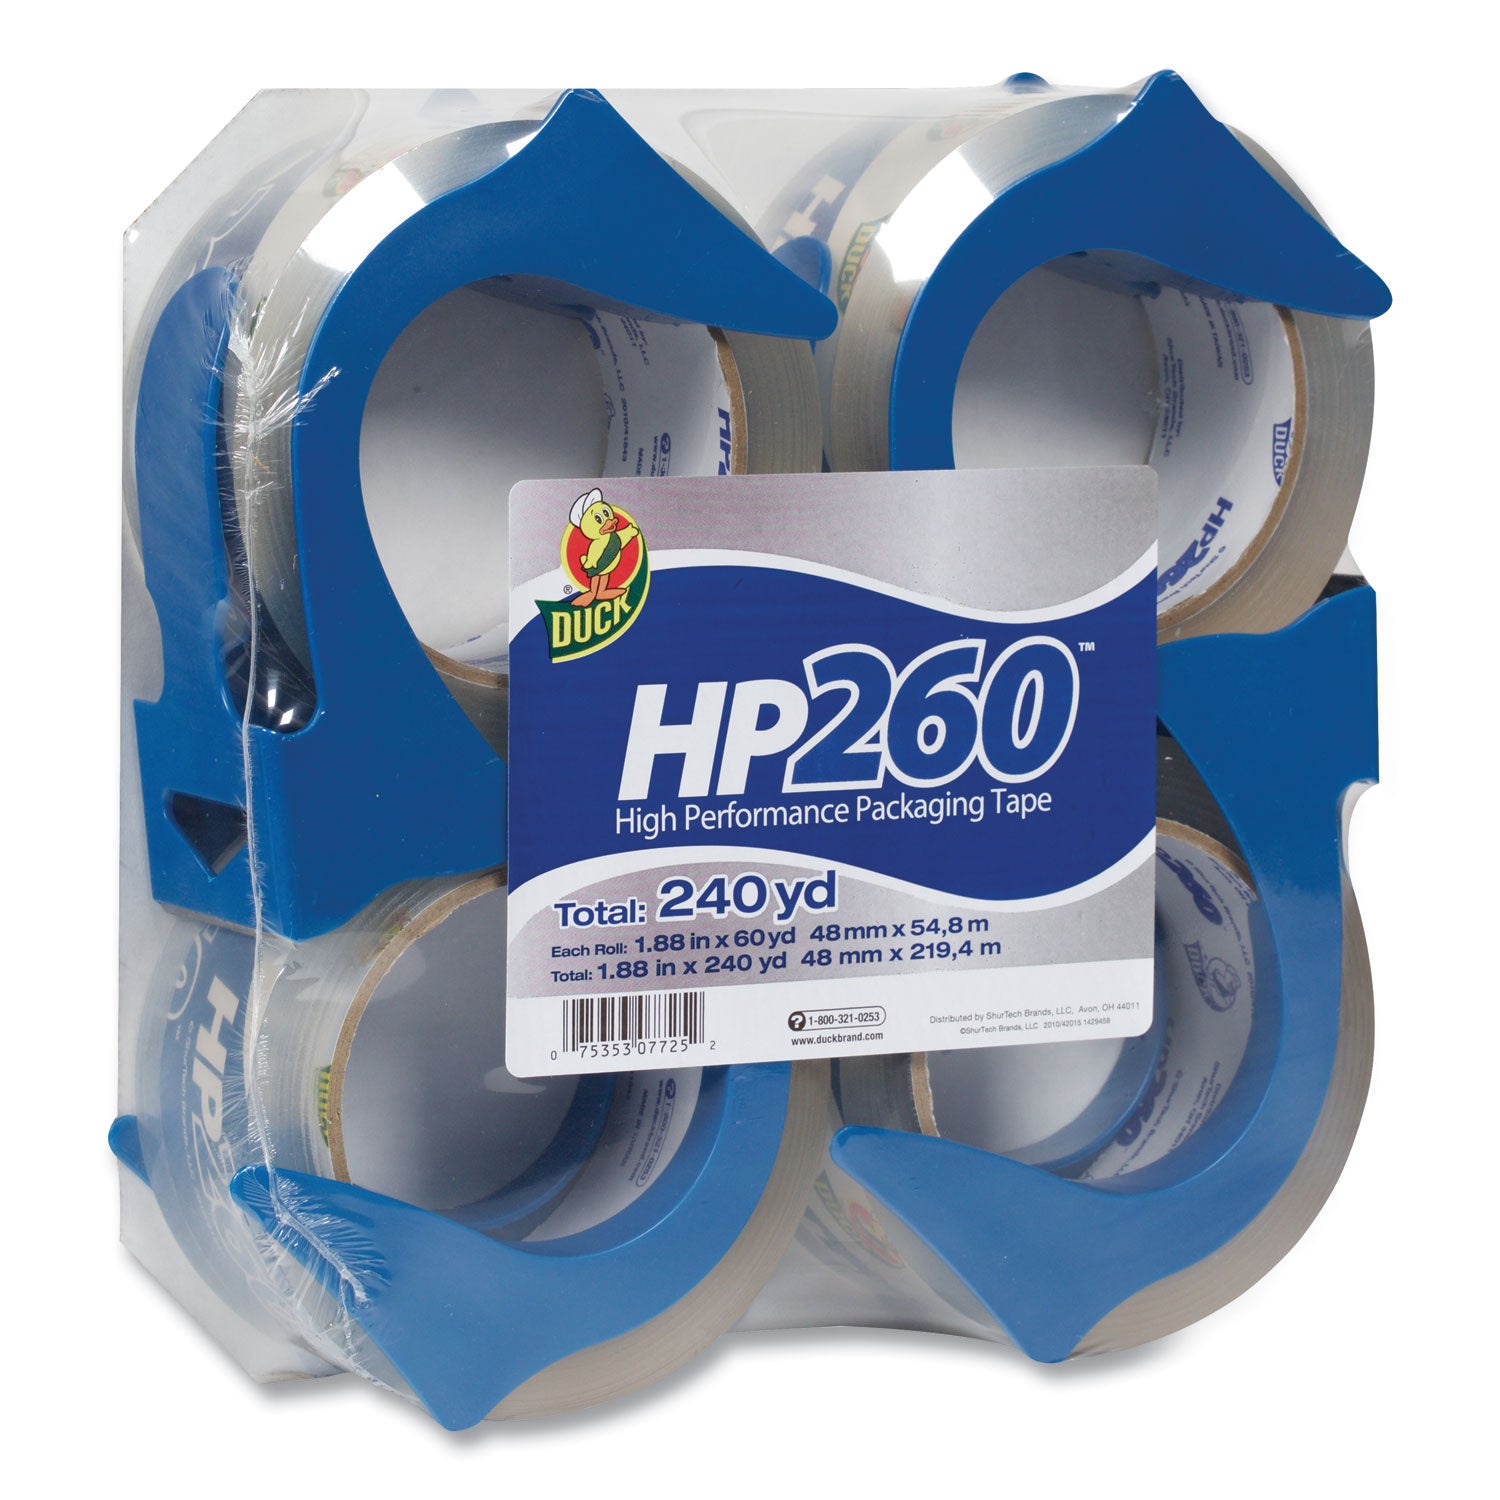 HP260 Packaging Tape with Dispenser, 3" Core, 1.88" x 60 yds, Clear, 4/Pack - 